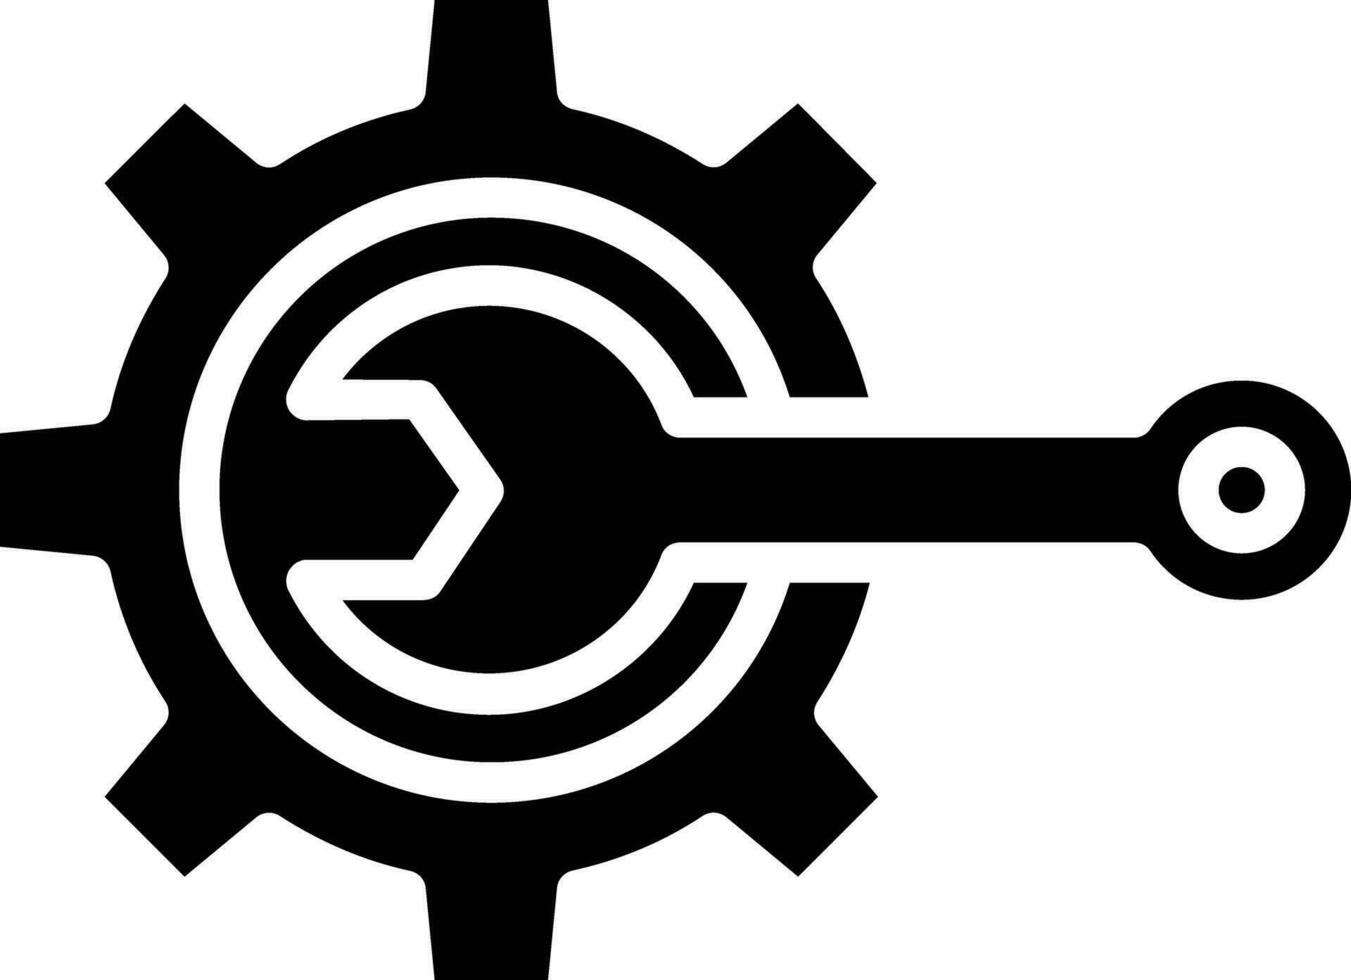 Cog wheel Wrench solid and glyph vector illustration